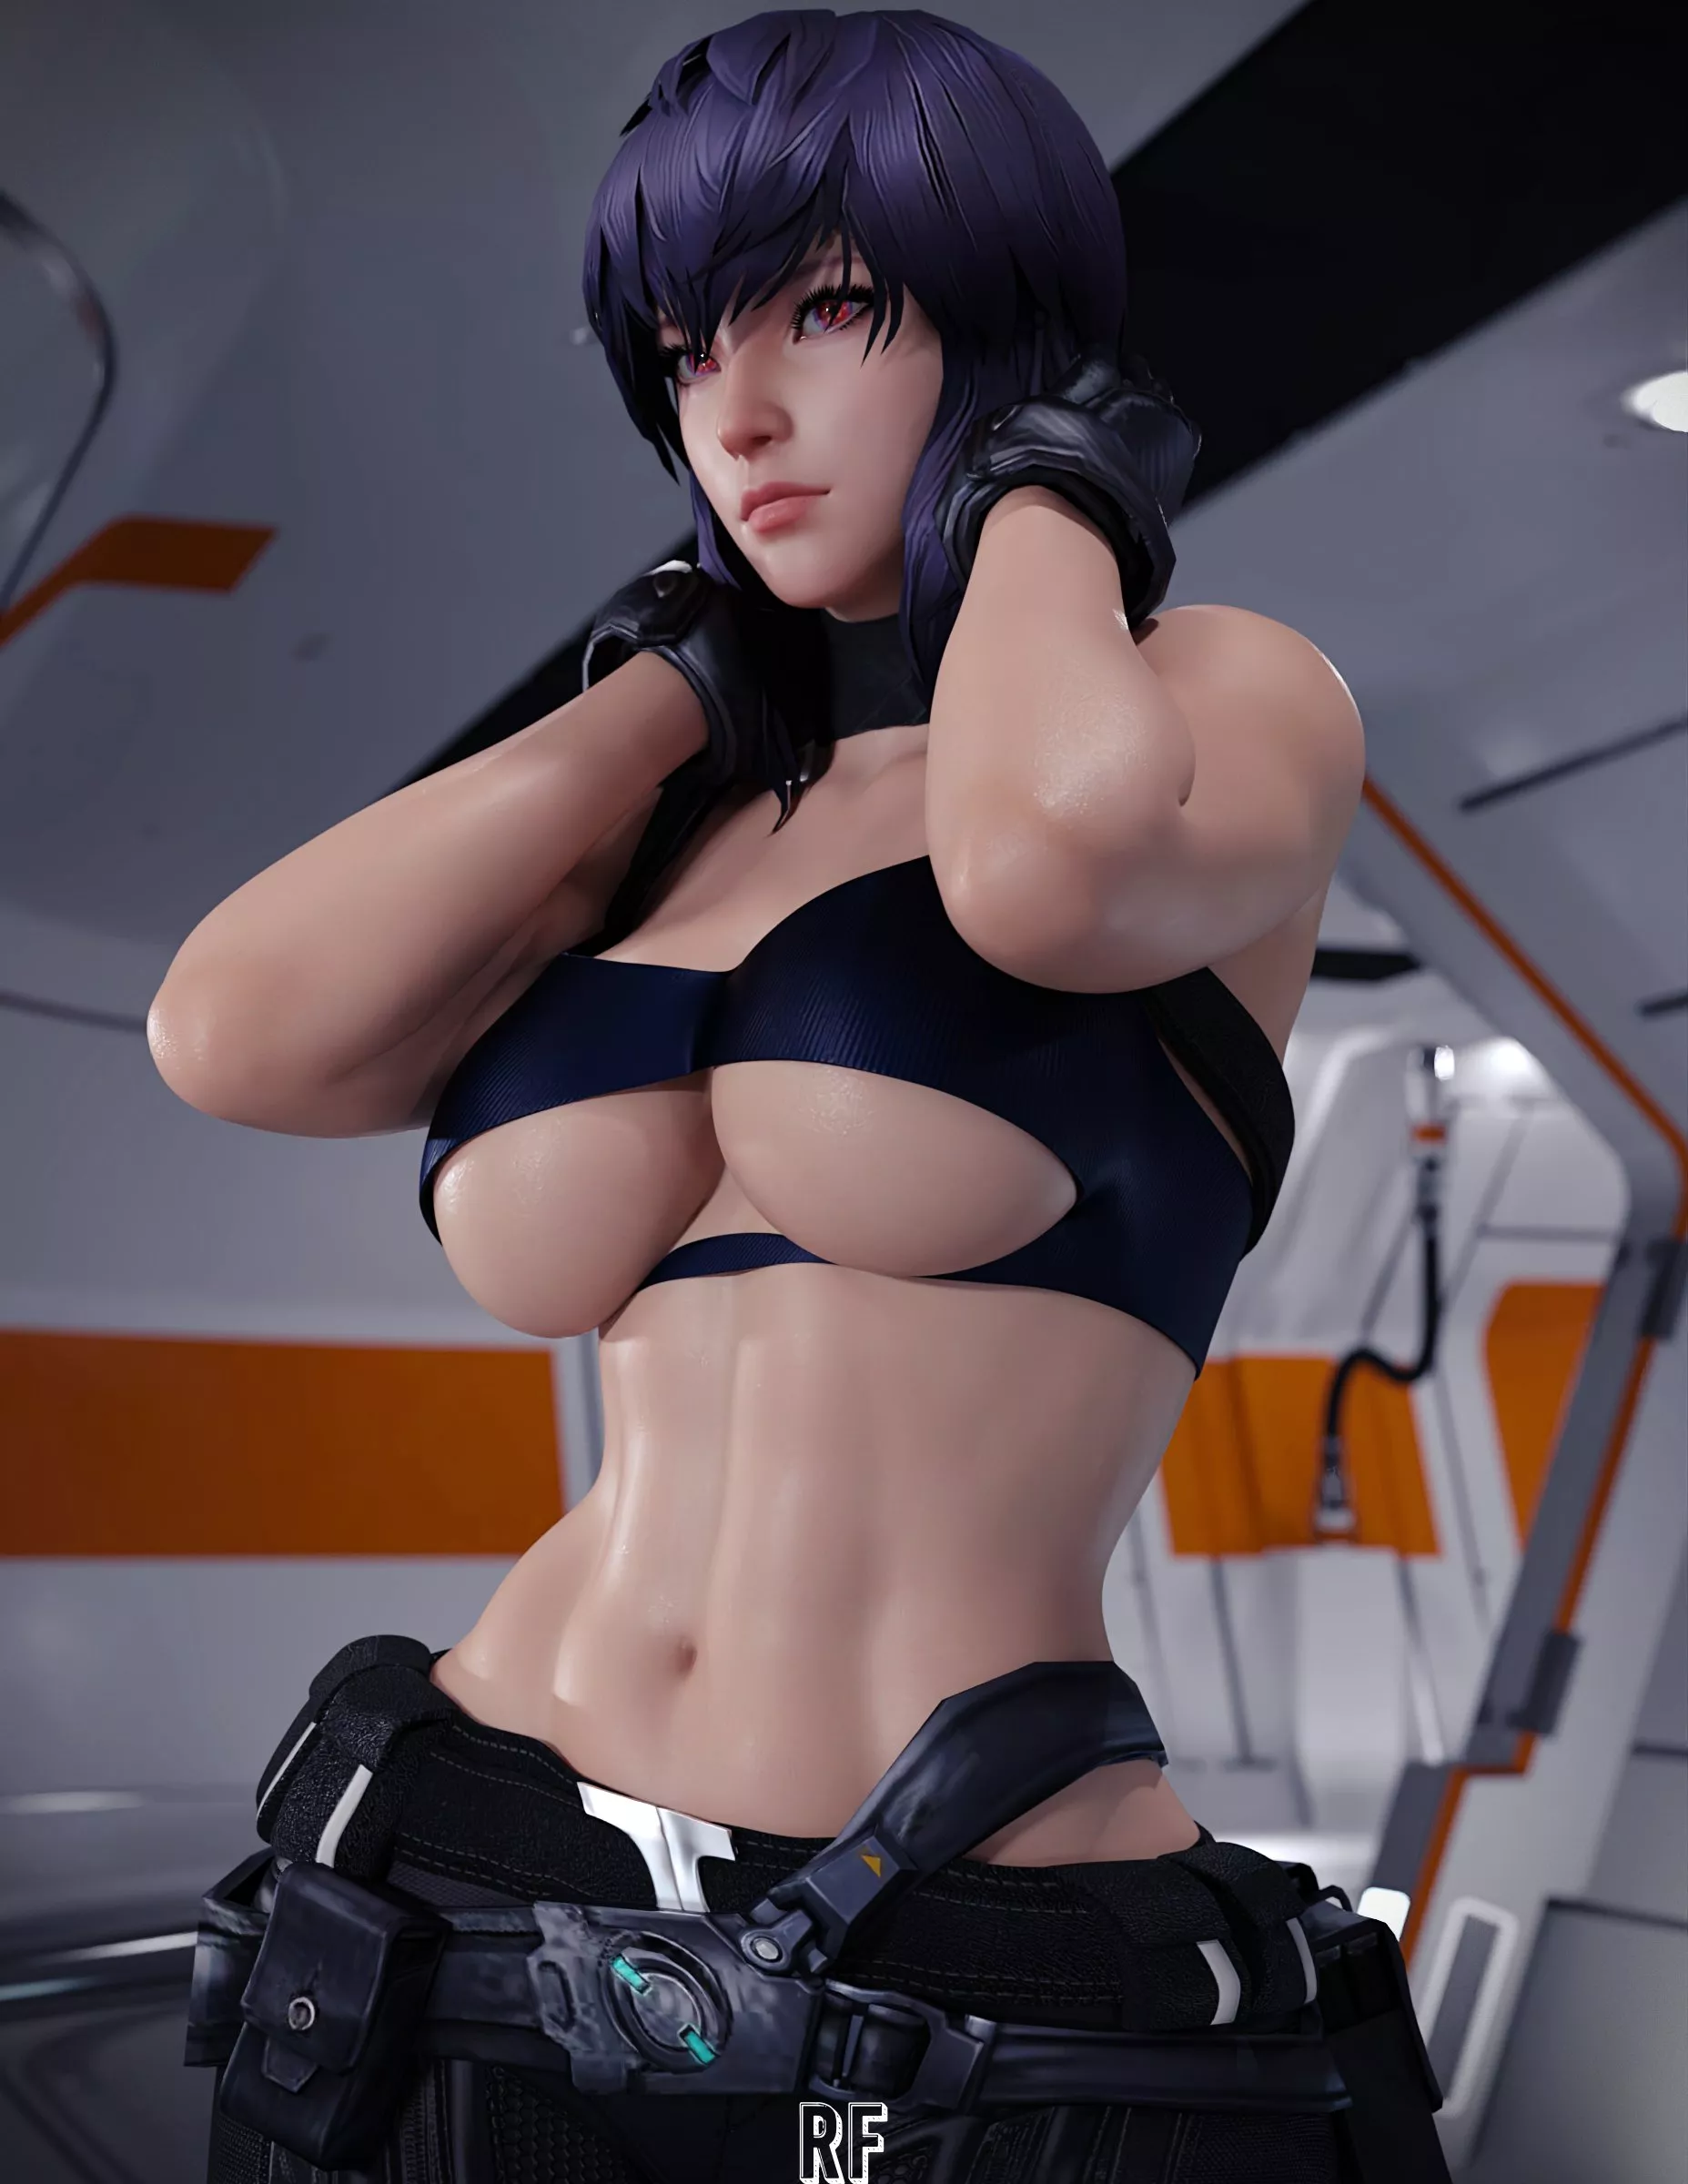 Motoko rude frog ghost in the shell nude porn picture | Nudeporn.org